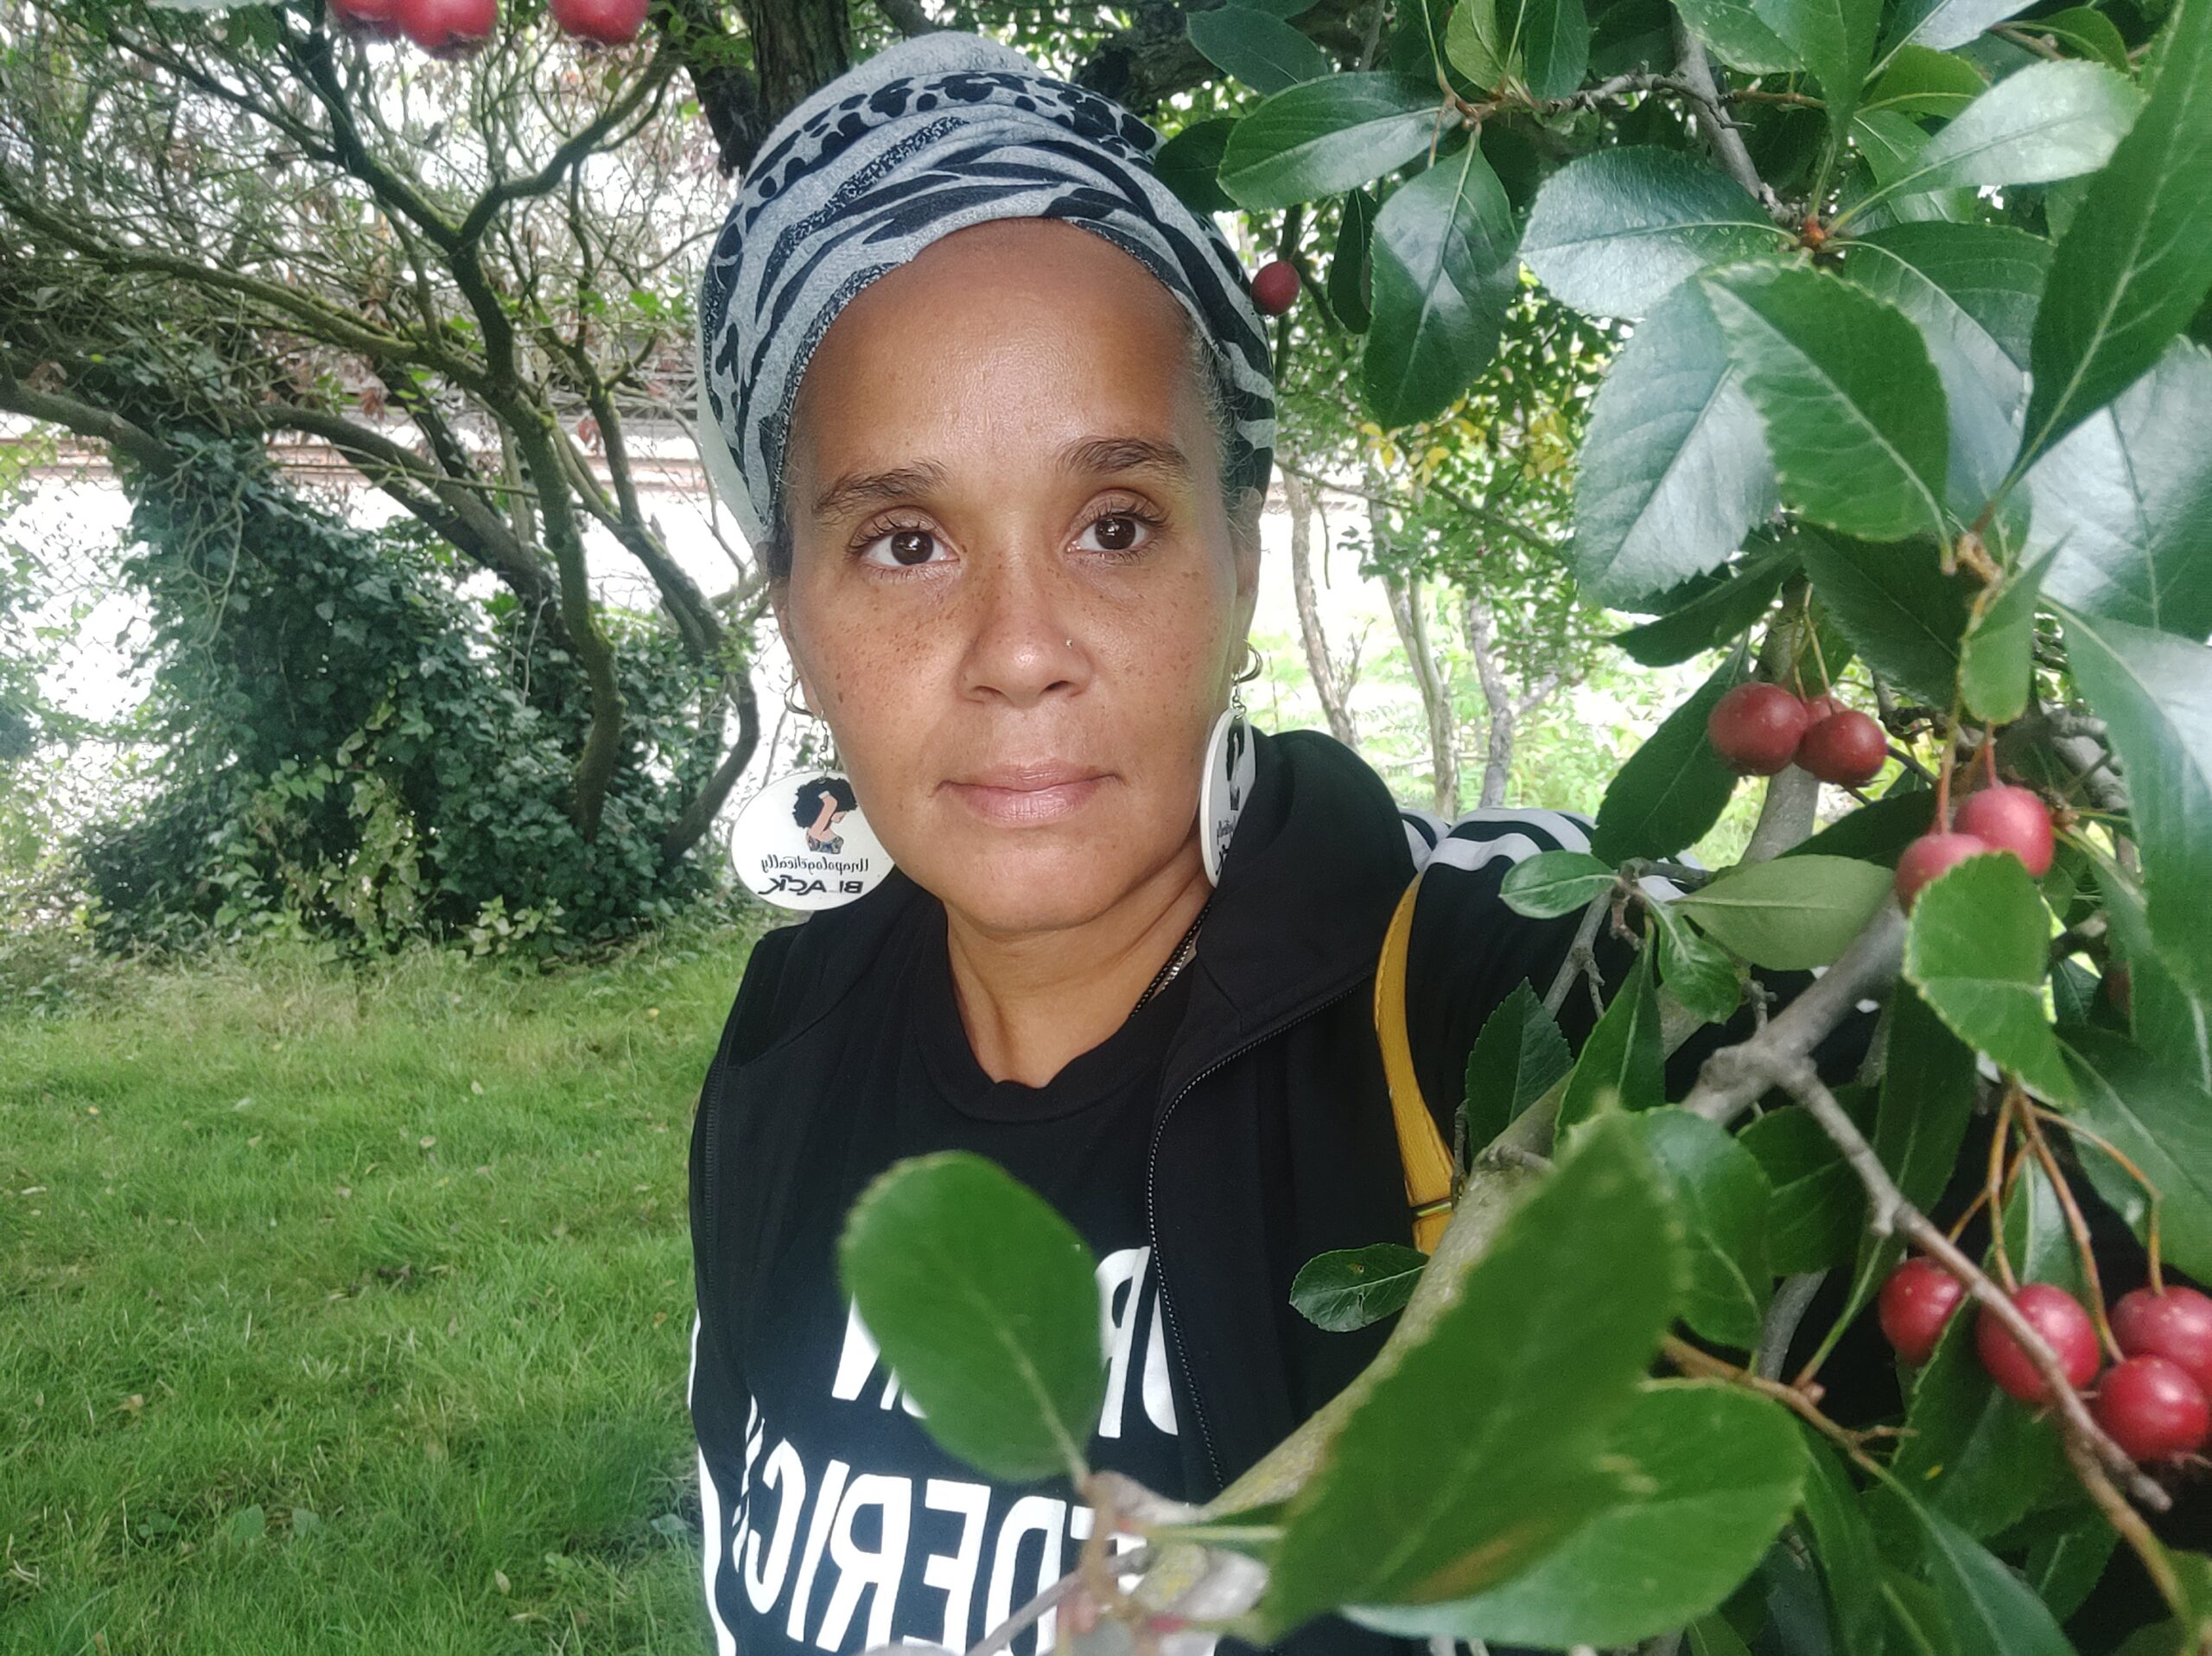 A Black woman wearing a black and white headscarf, long round earrings and a black sweatshirt standing near a tree with lush green leaves. 